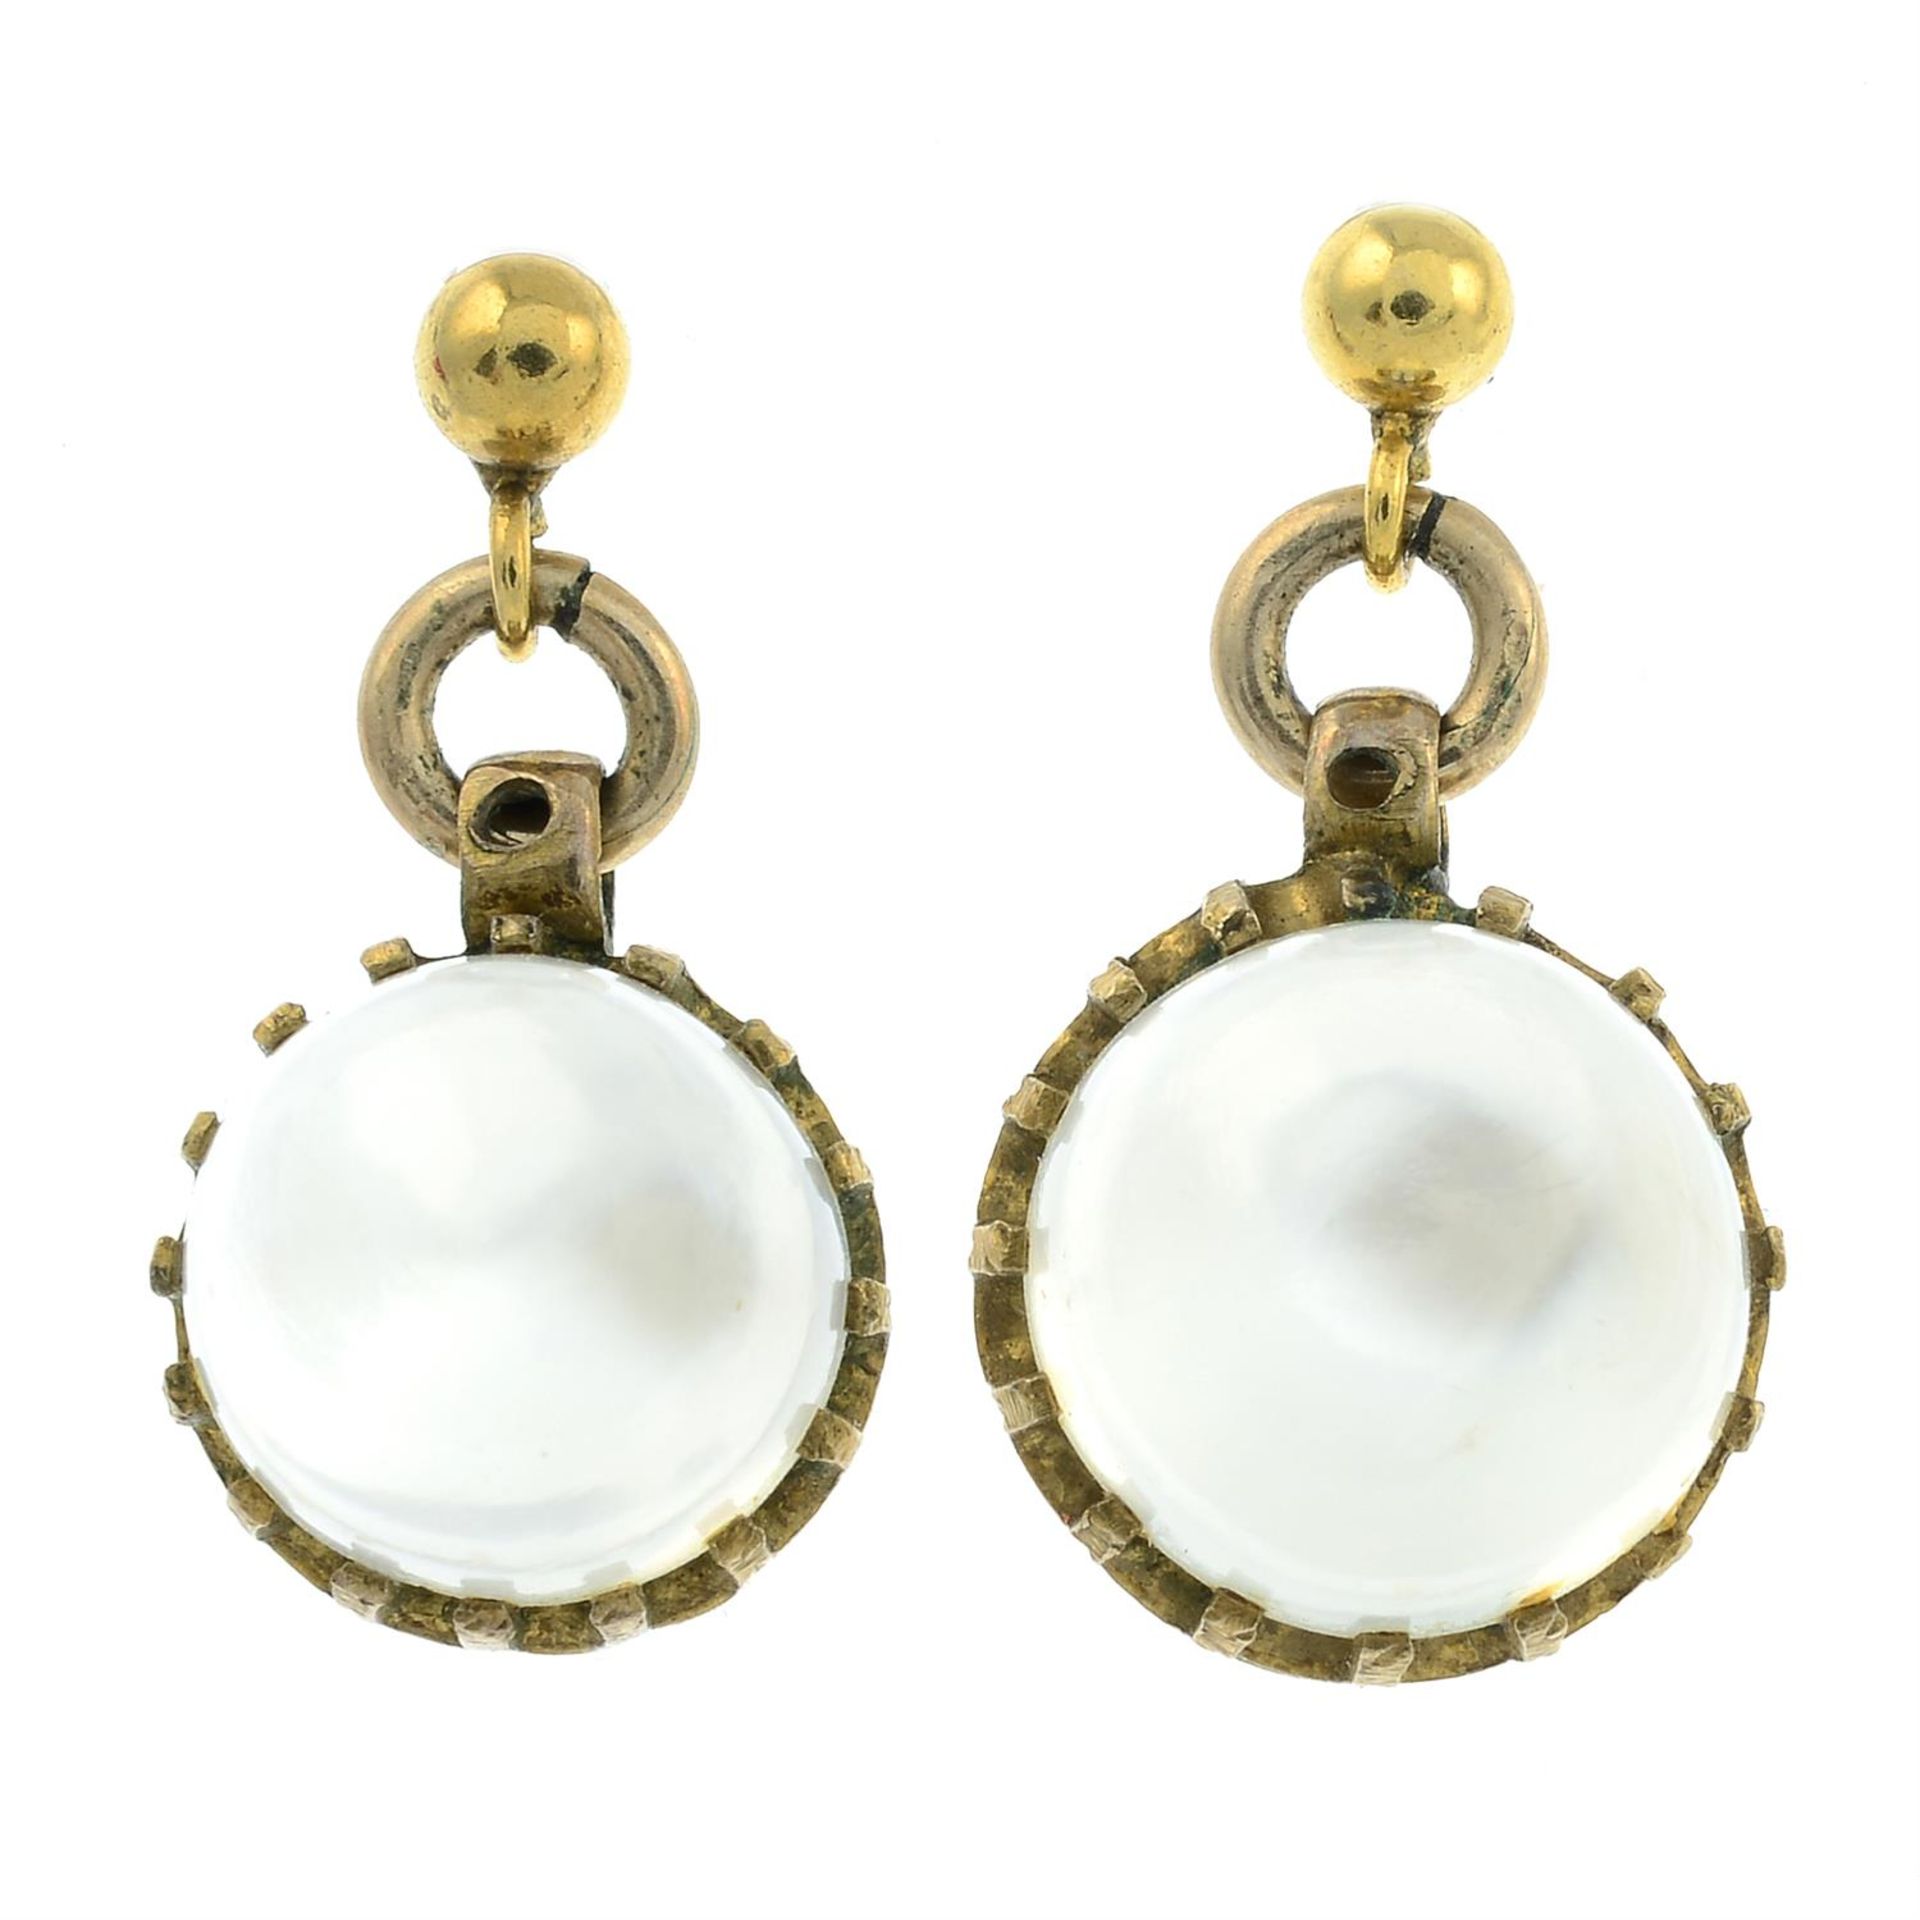 A pair of late Victorian moonstone drop earrings, with later stud fittings.